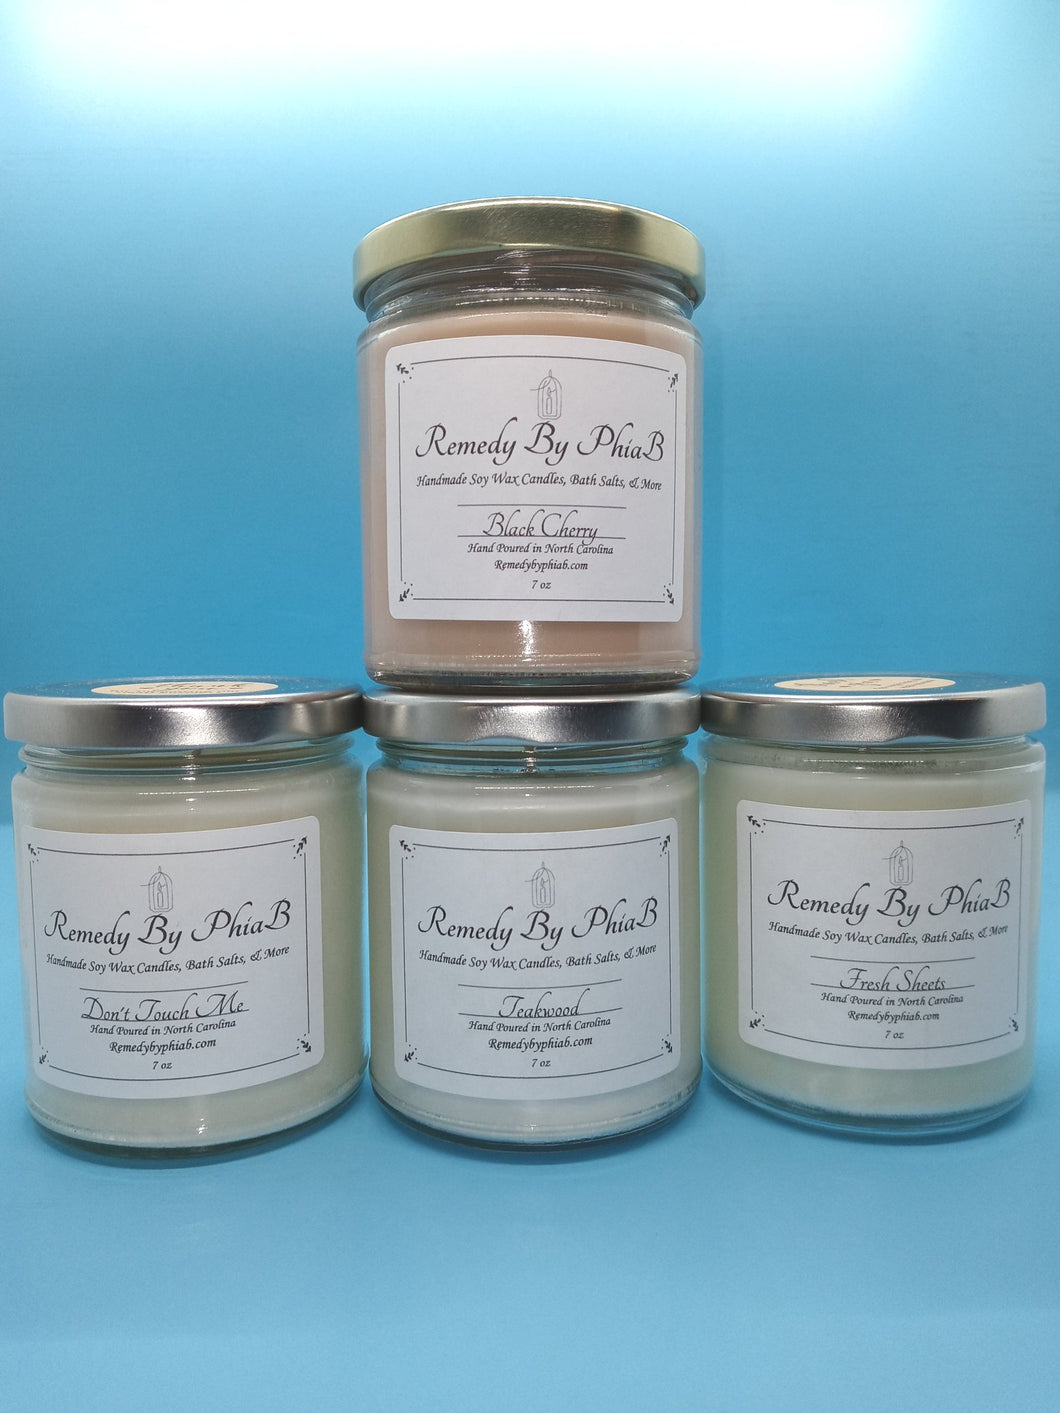 Handmade All-Natural Soy Wax Candles! Scented!